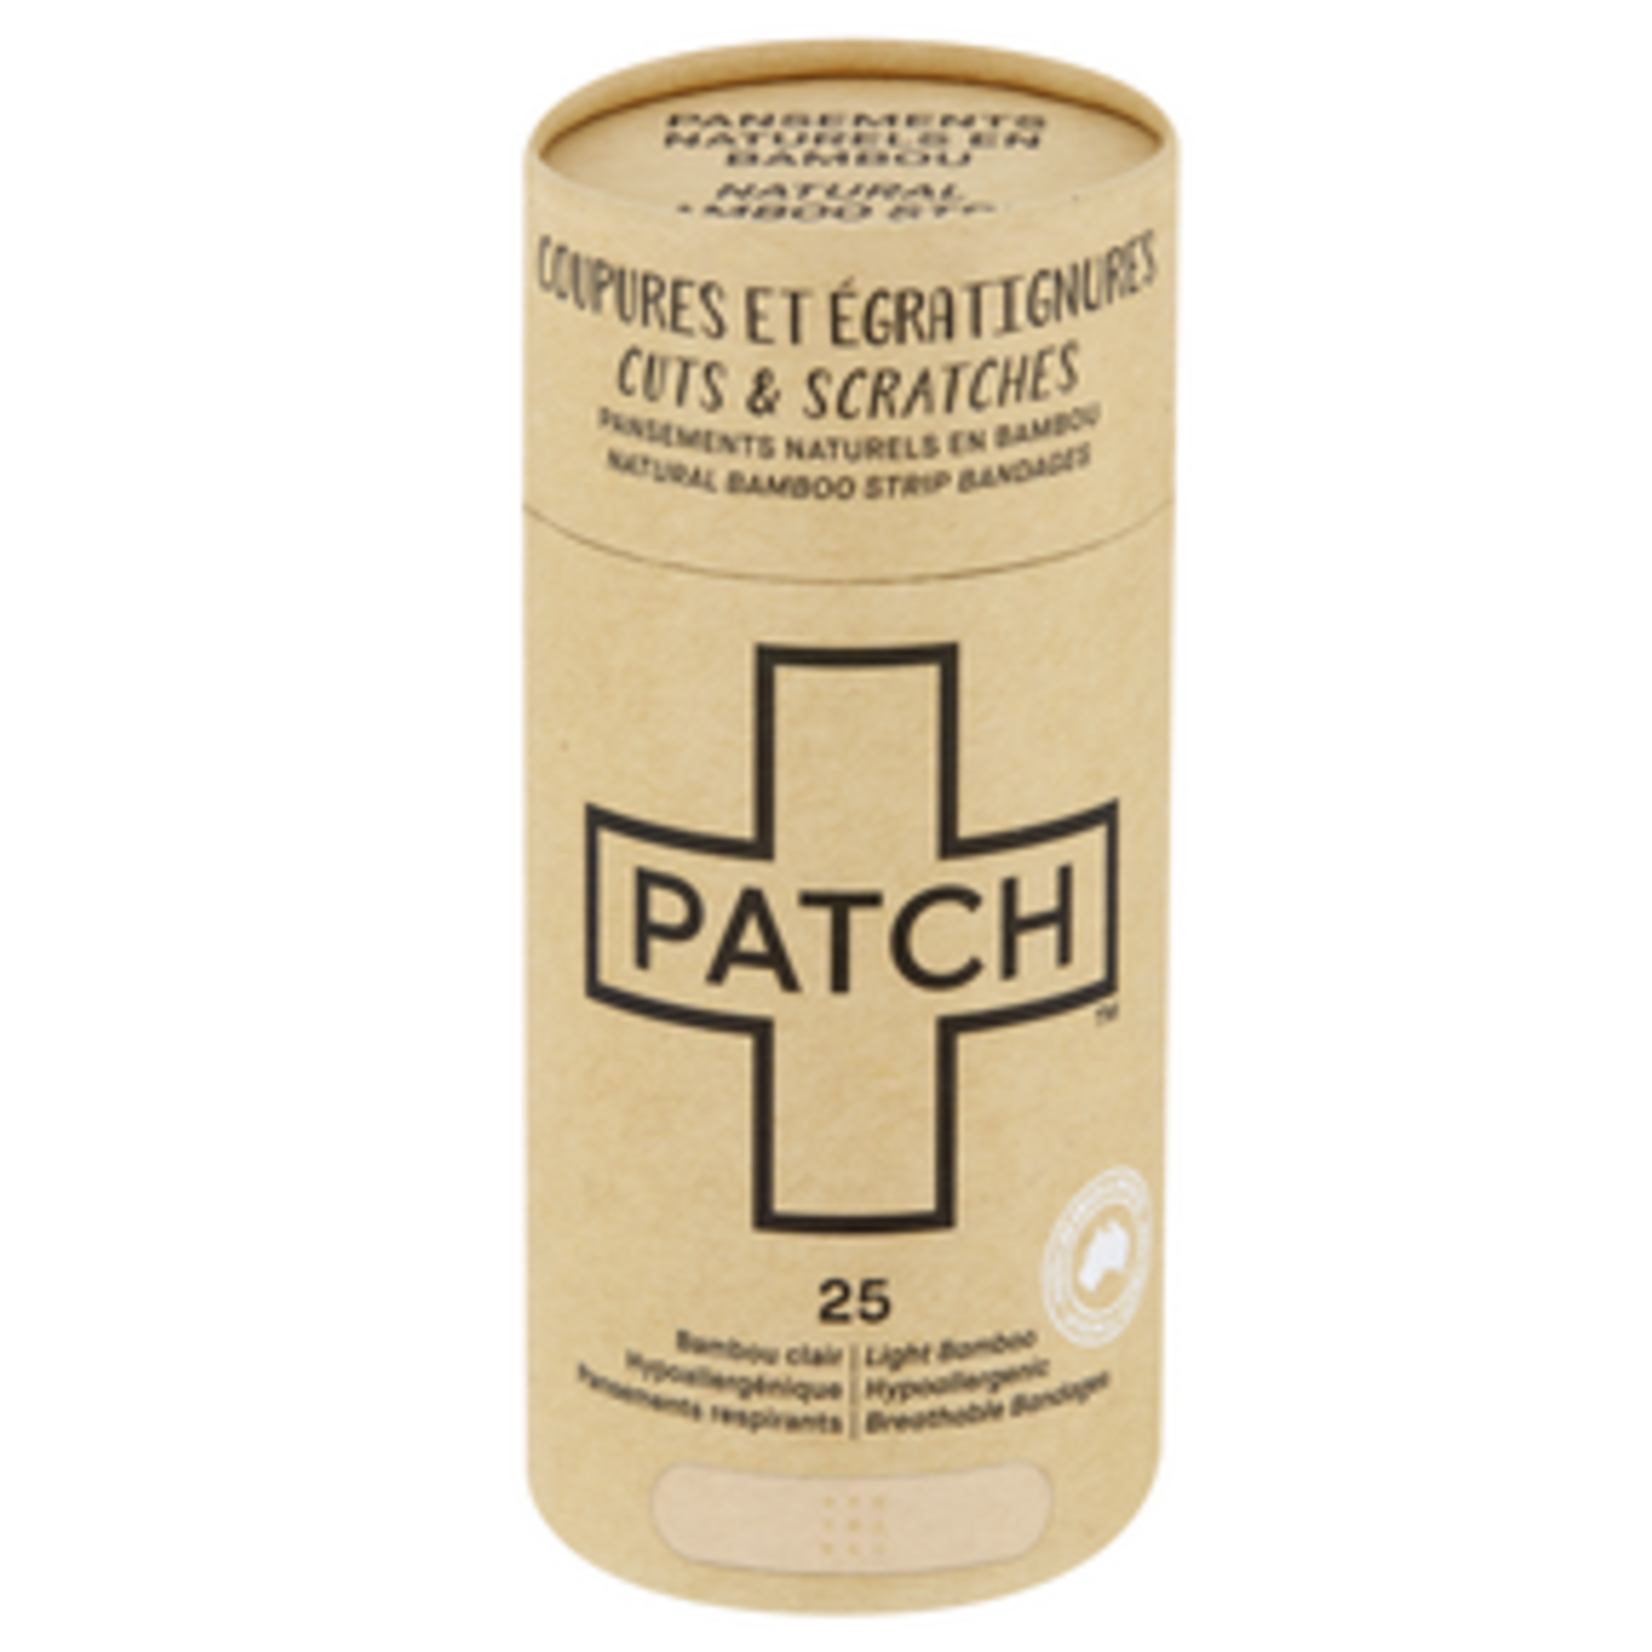 PATCH PATCH NATURAL ADHESIVE BANDAGES 25PK